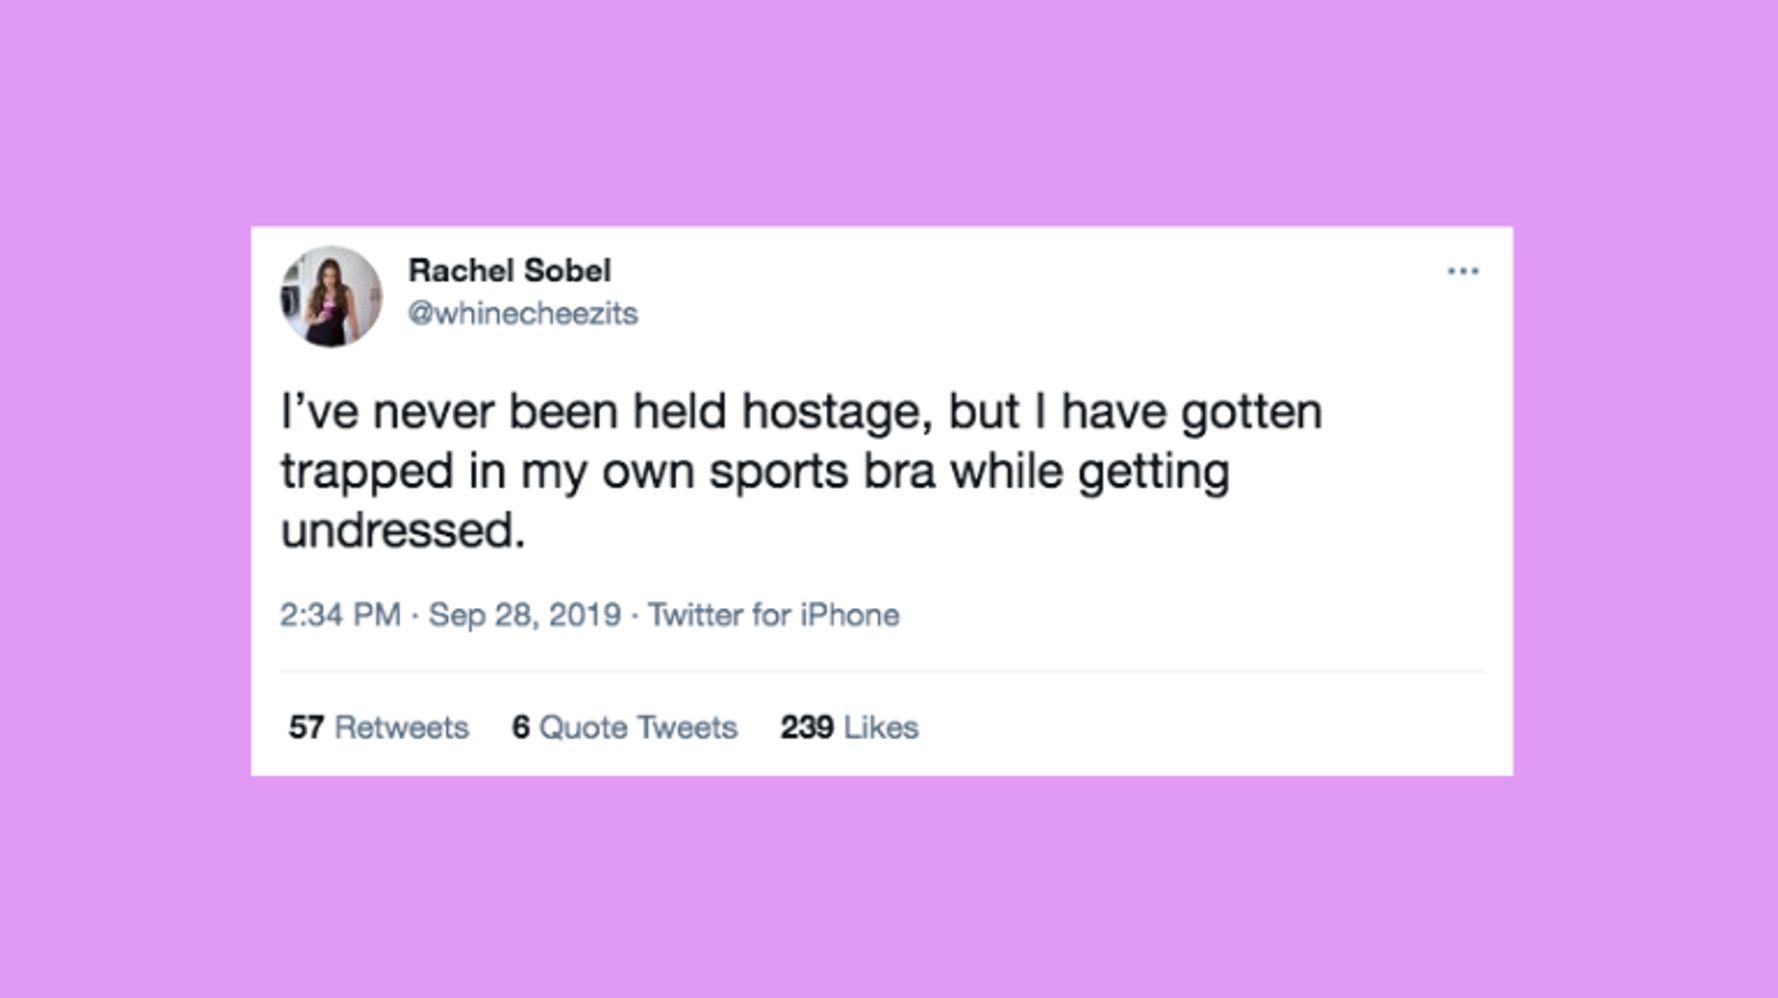 Funny Tweets About Bras